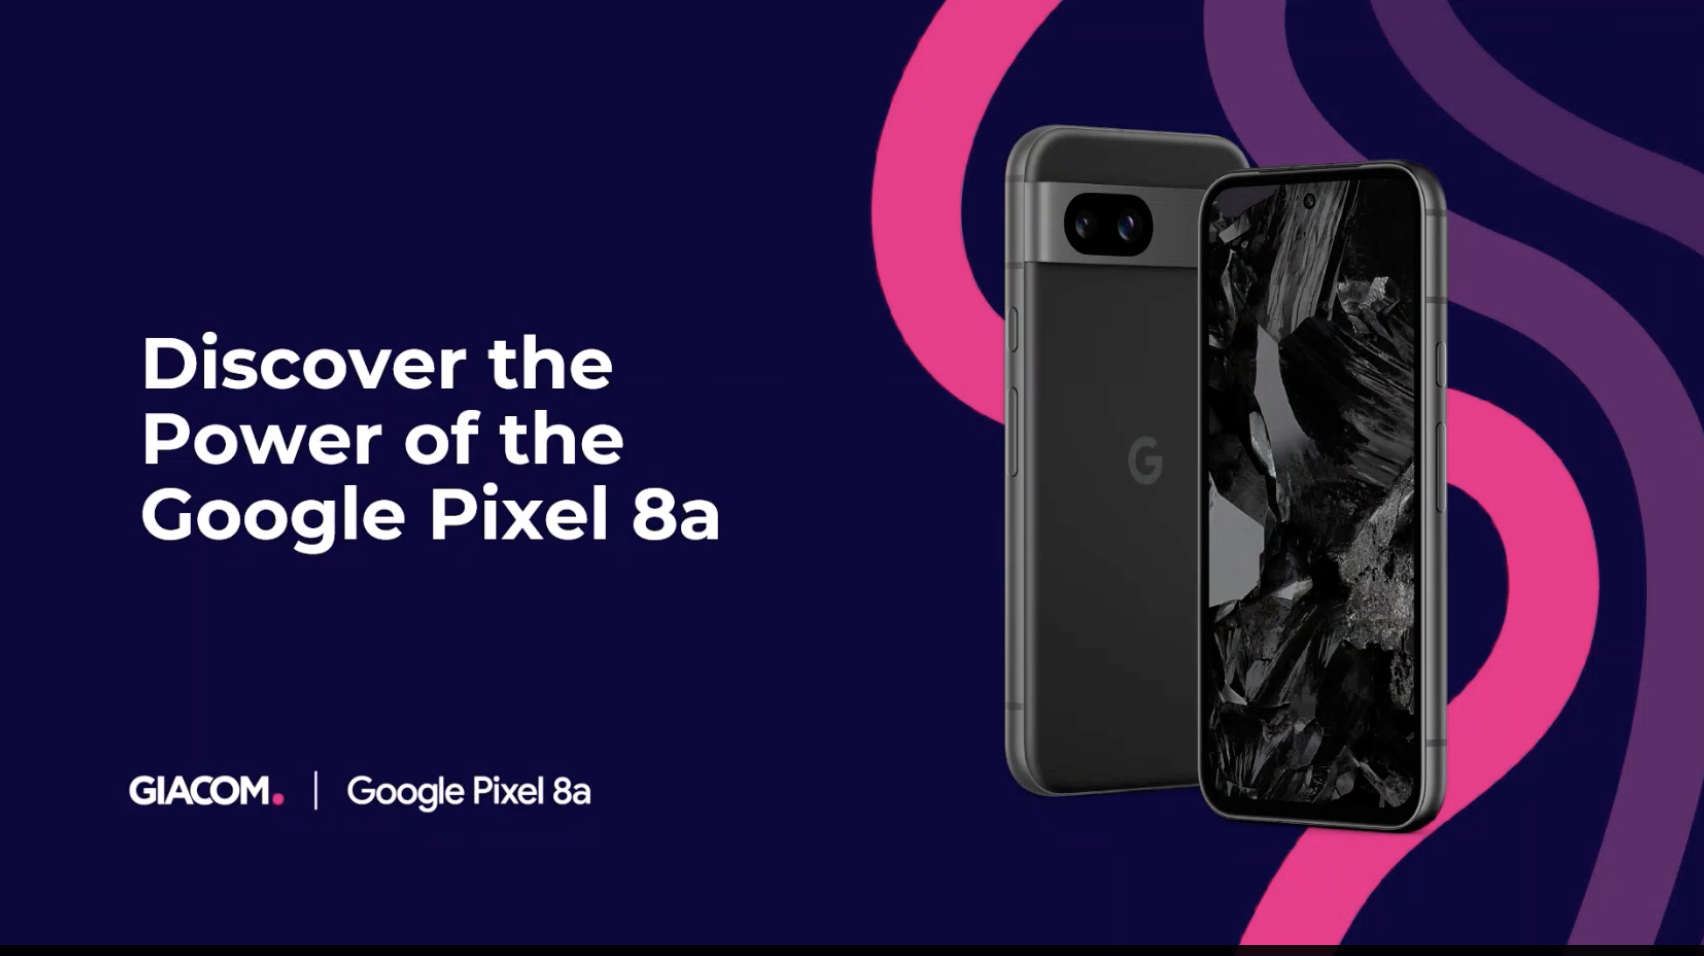 Discover the Power of the Google Pixel 8a